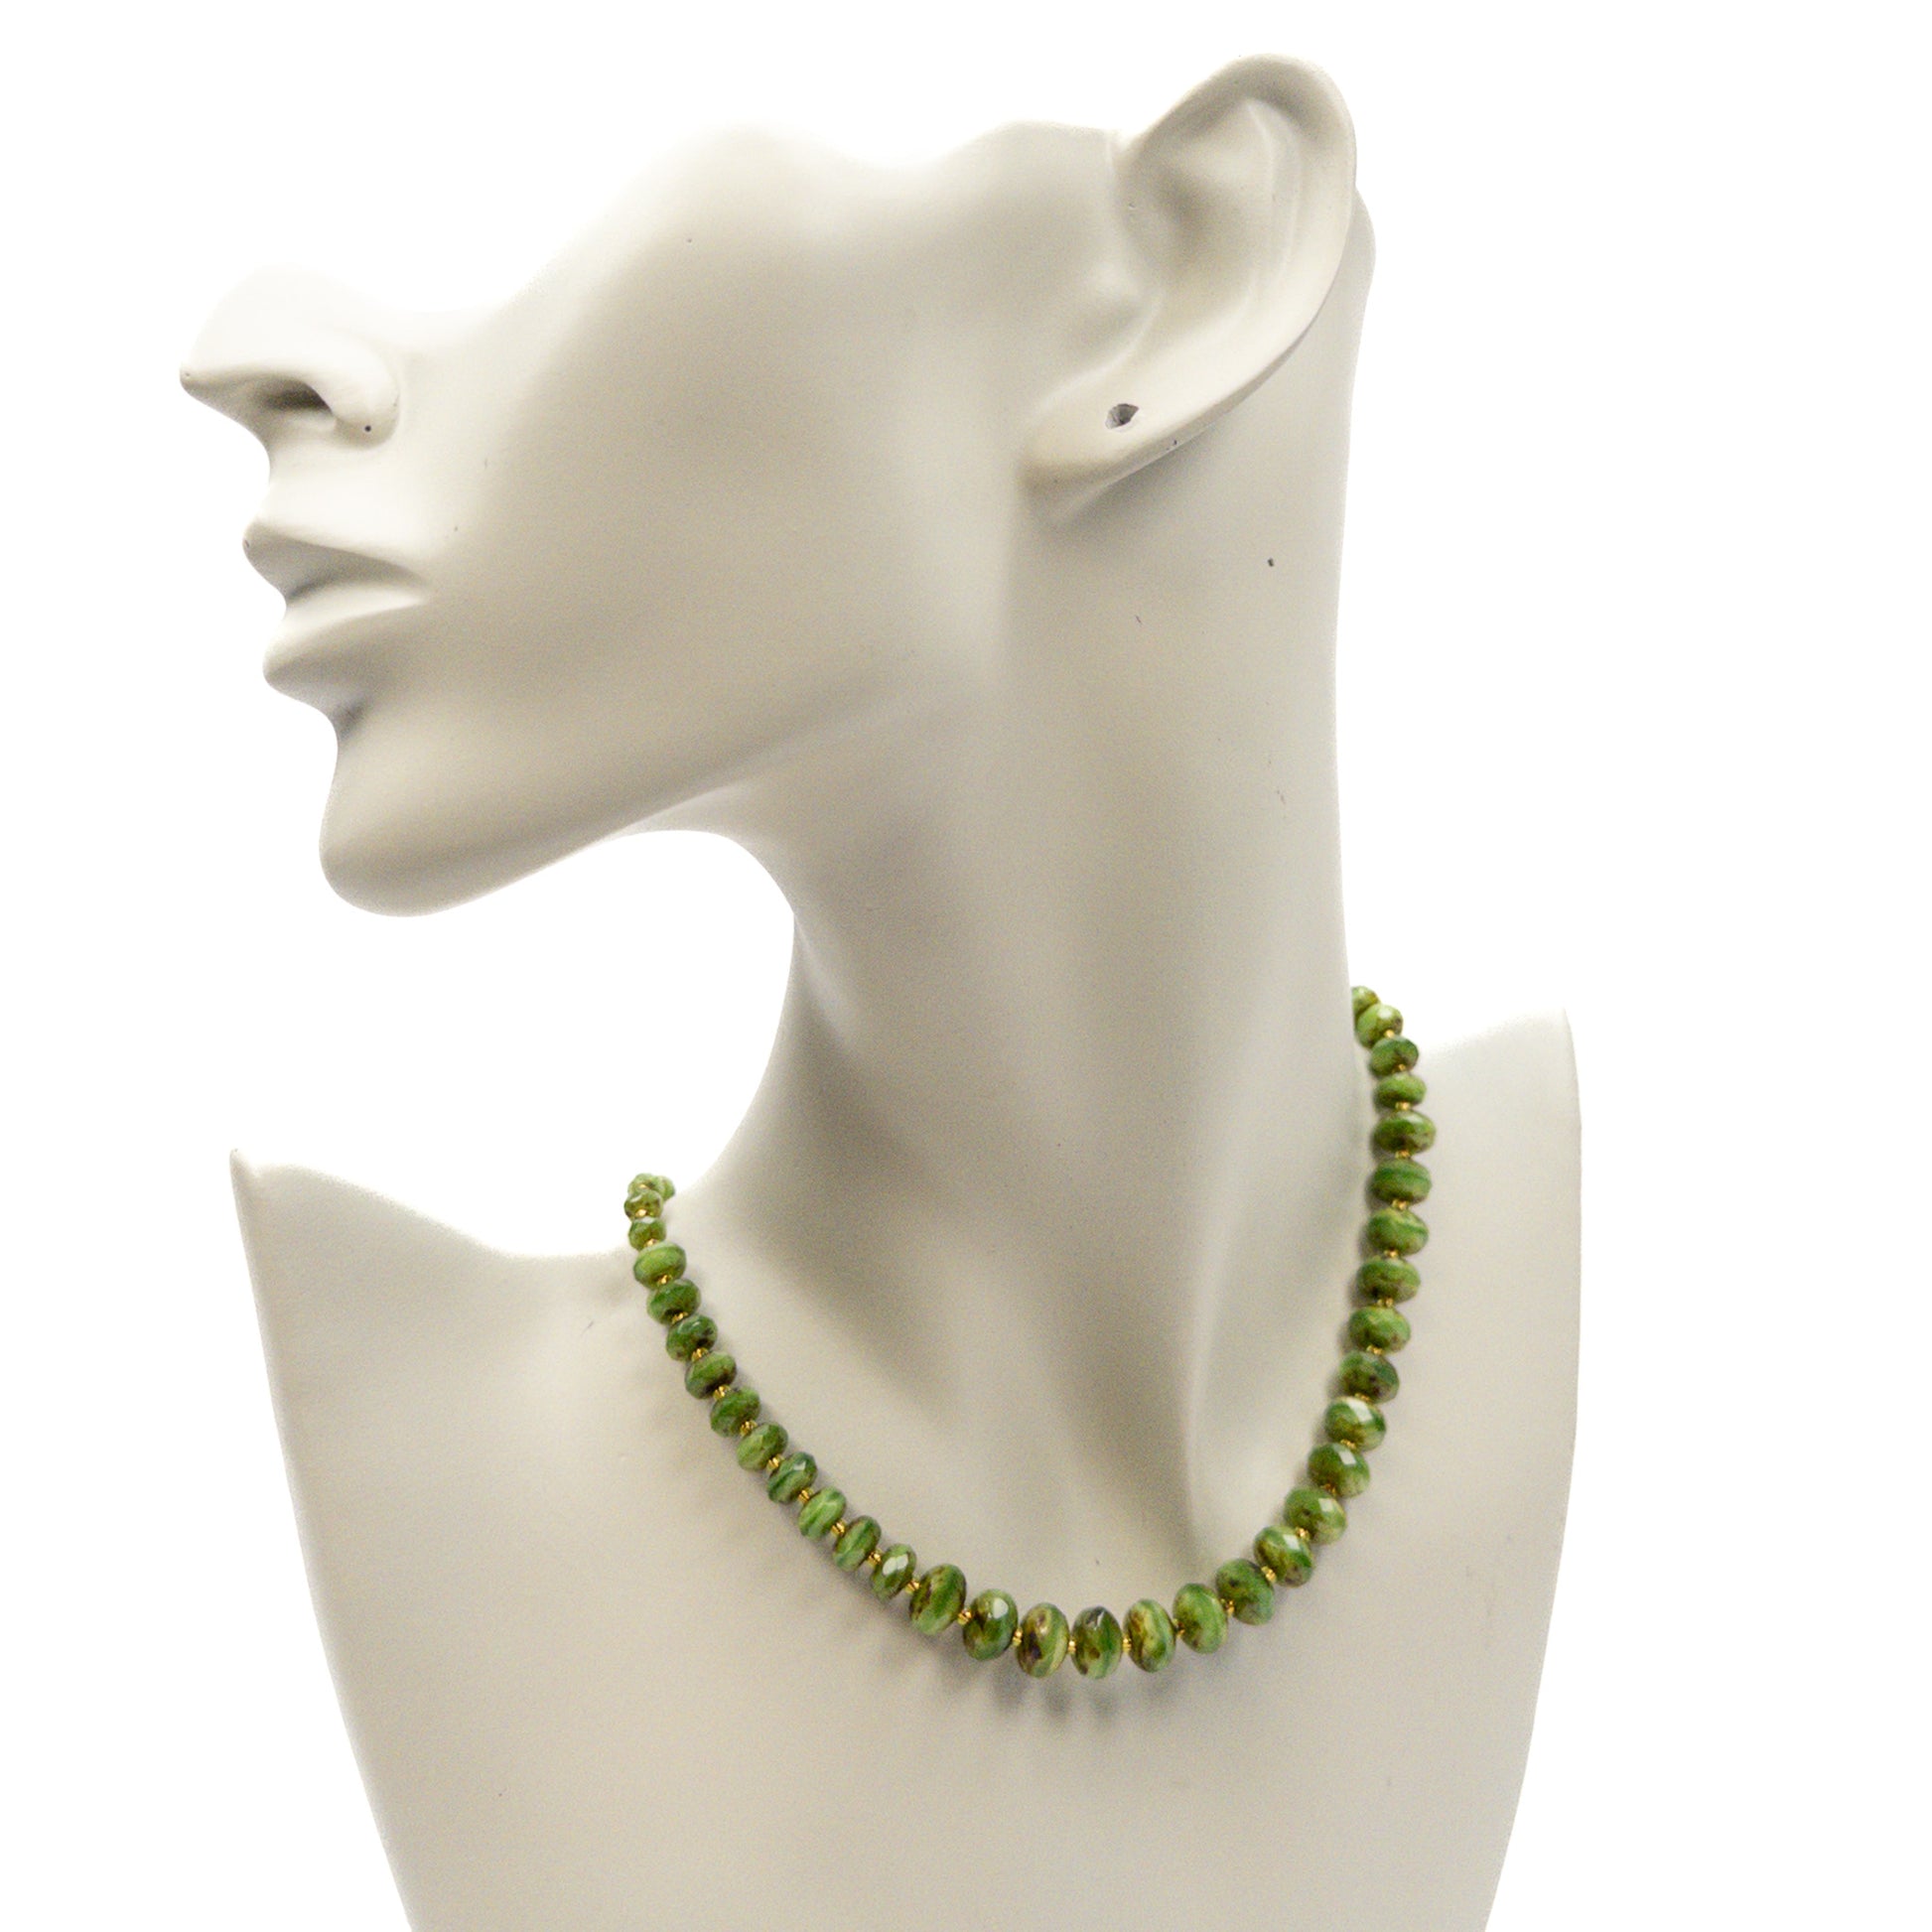 **NEEDS PRICING** Czech Glass Graduated Necklace Kit (3 Color Options) - 1 kit-The Bead Gallery Honolulu